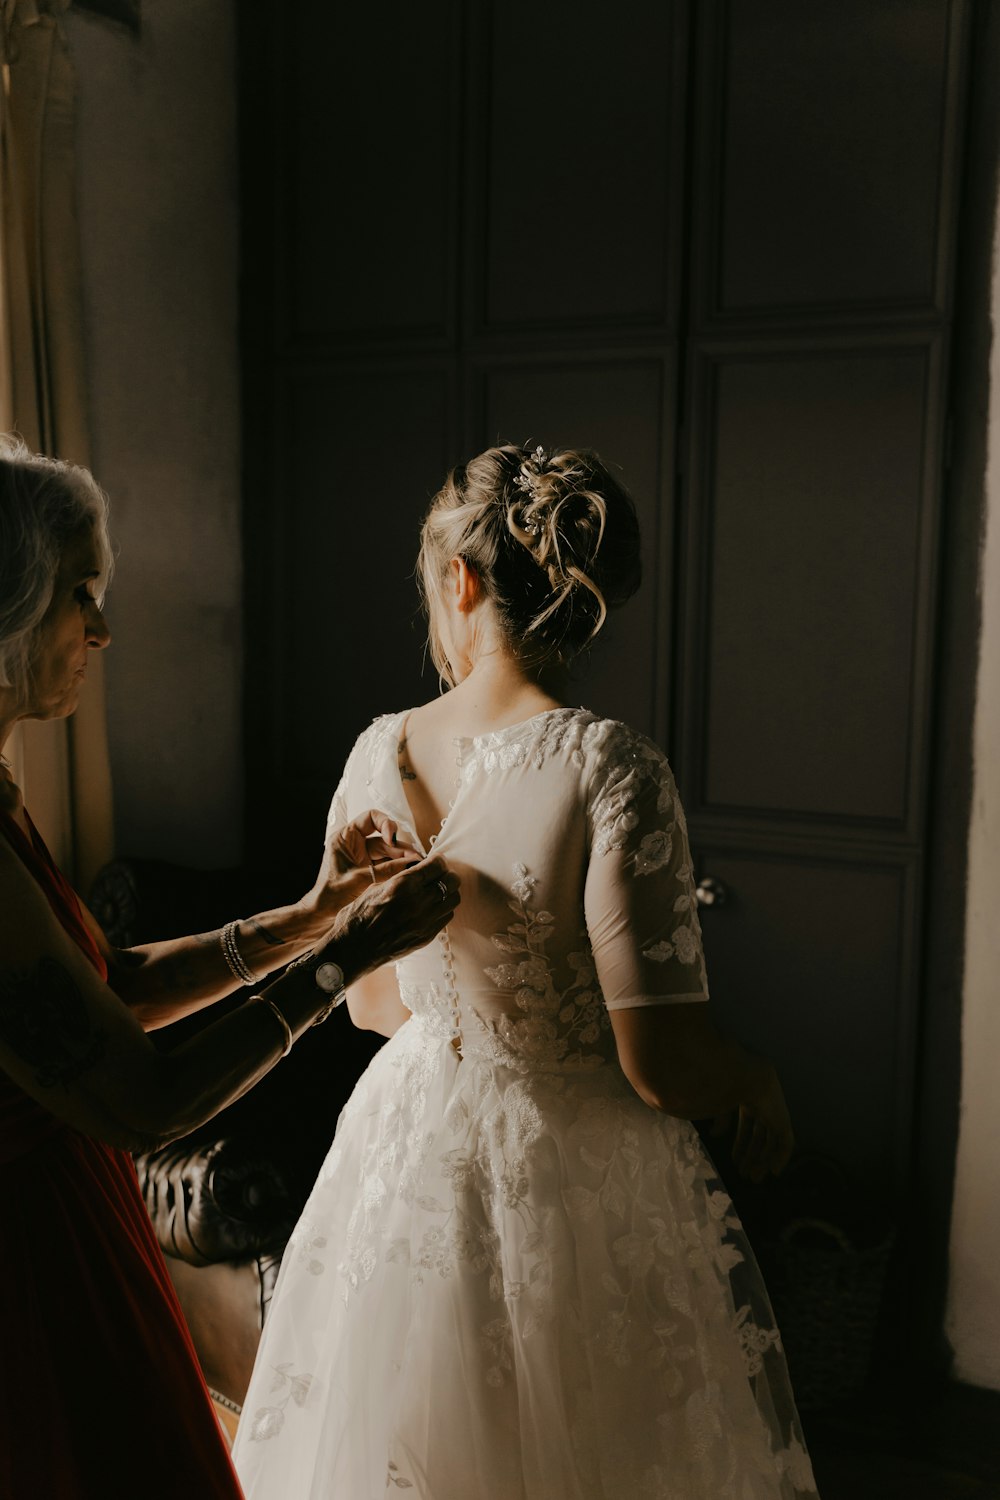 a woman helping another woman put on her wedding dress